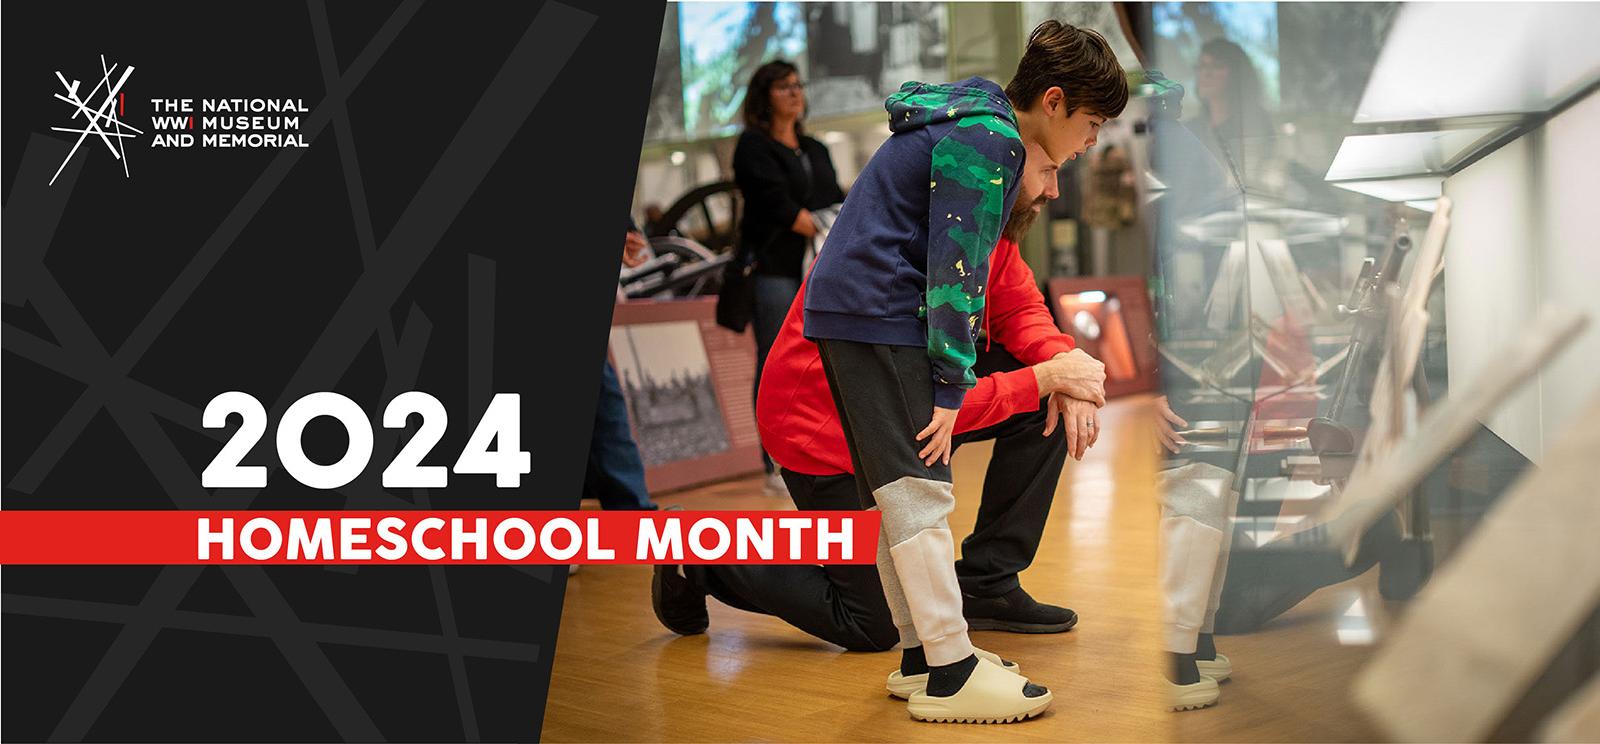 Image: modern photograph of a museum gallery. A school-aged child is bending down to look into a case near the floor while an adult man kneels next to him looking in the same case. Text: '2024 / Homeschool Month'